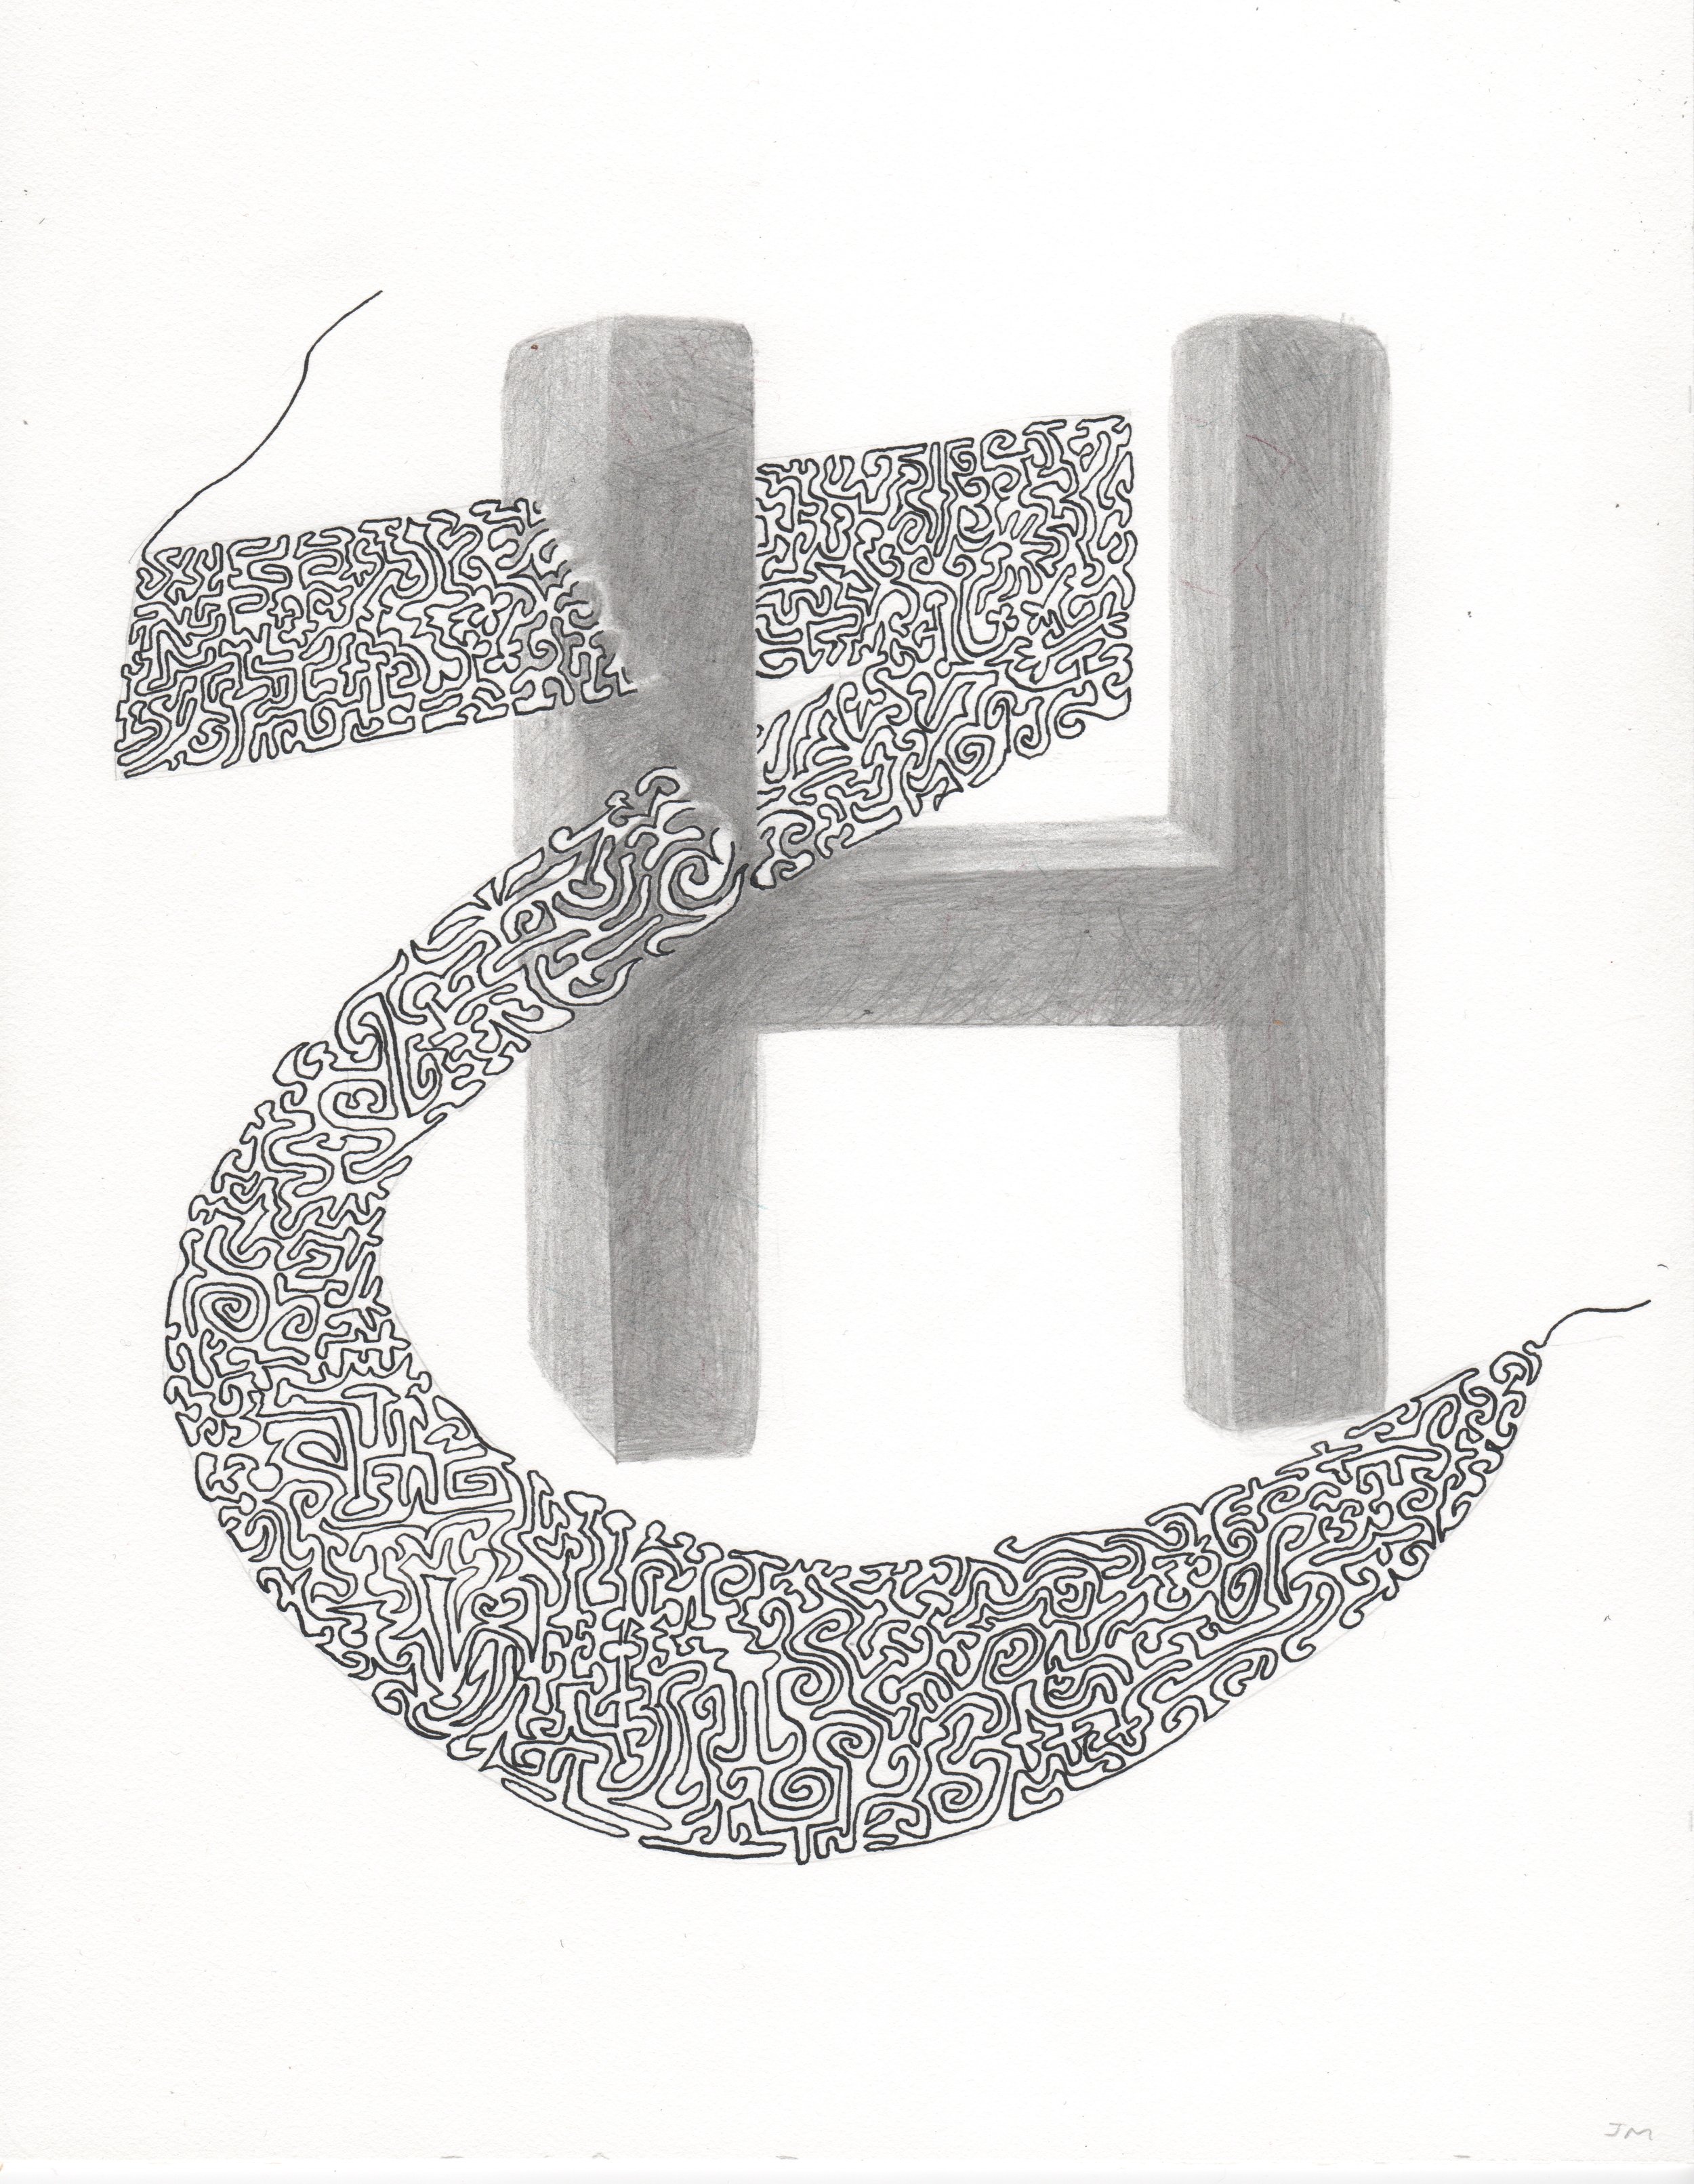  Joel Moskowitz,  Arabic  Haa,&nbsp; with H,  Ink and pencil on paper, 11x9 